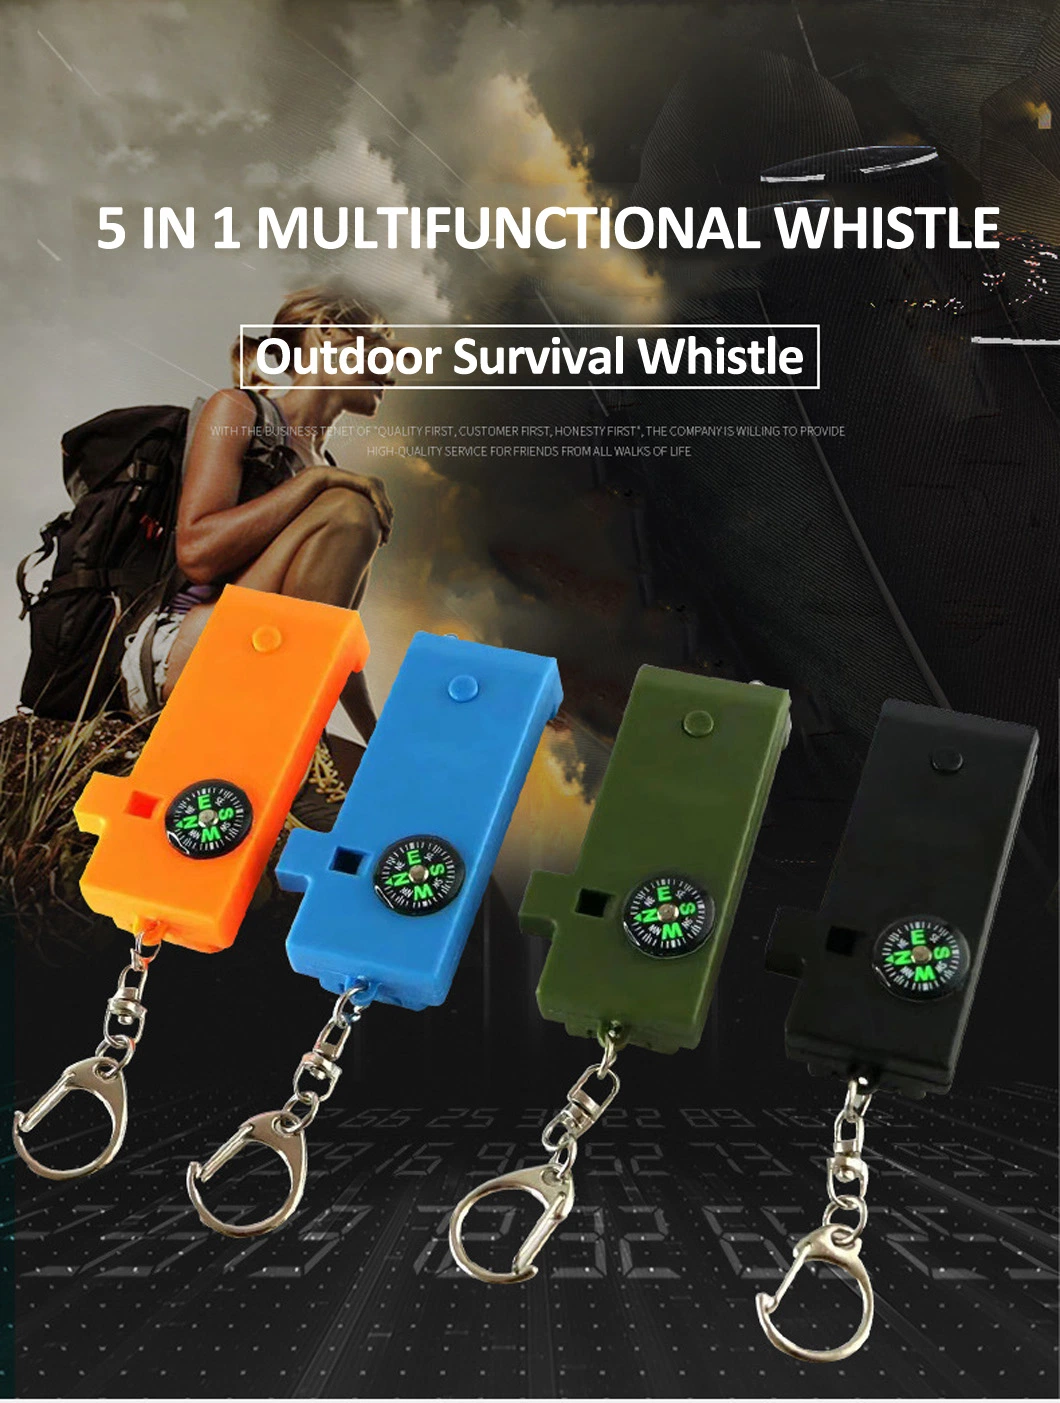 Outdoor 5 in 1 Multi-Function Whistle Survival Whistle Rescue LED Light Archaeological Magnifying Glass Compass with Key Pendant